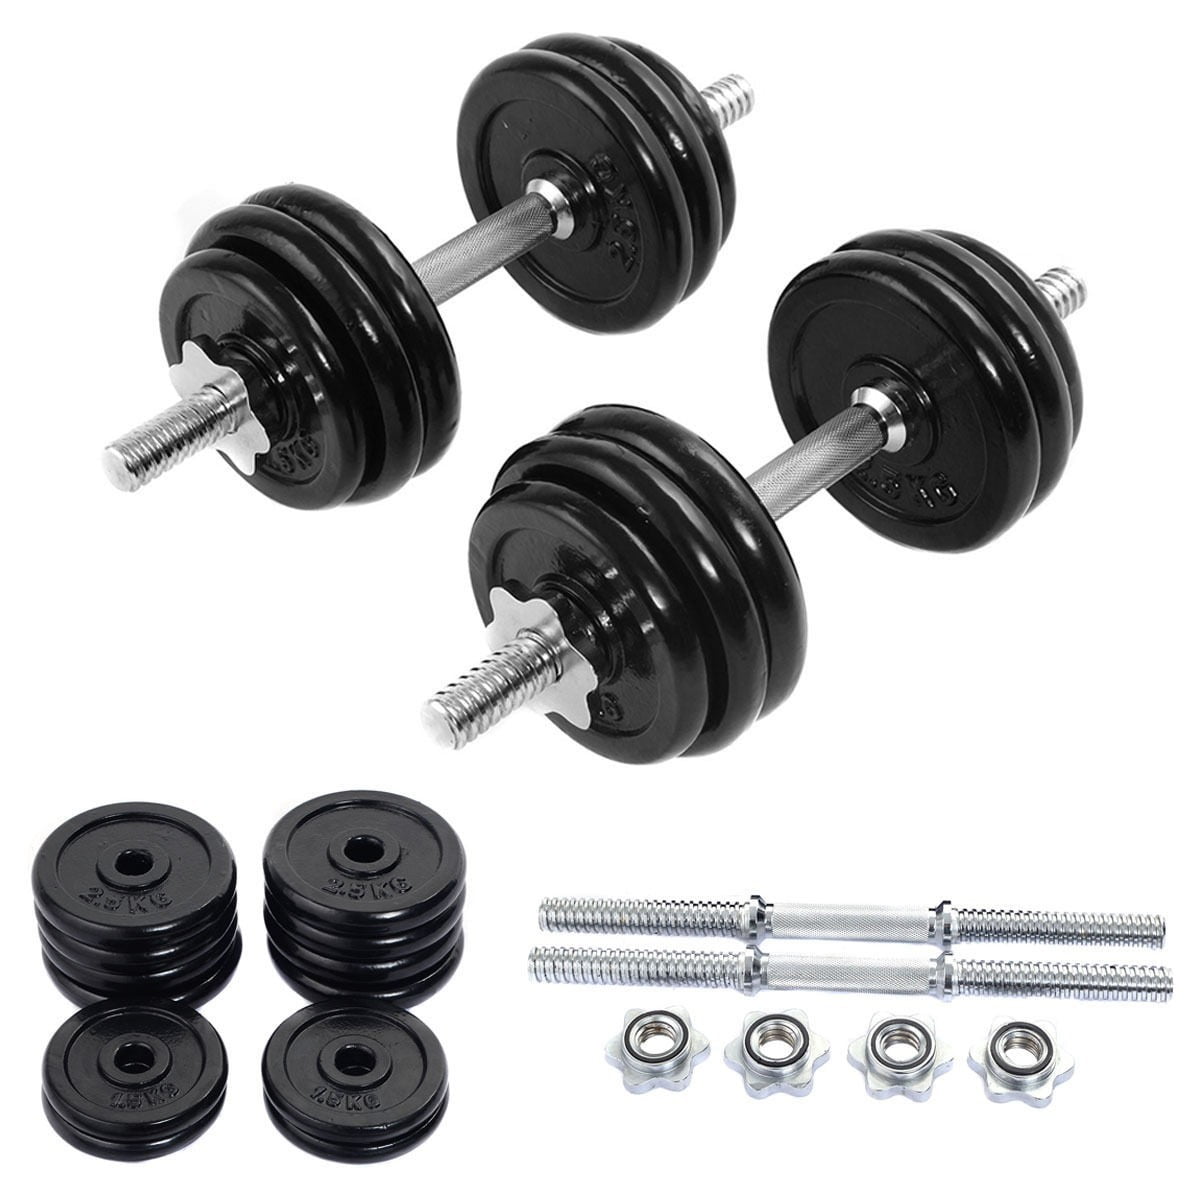 Details about   Totall 110/66 Weight CAP Dumbbell Set Adjustable Gym Barbell Plates Body Workout 